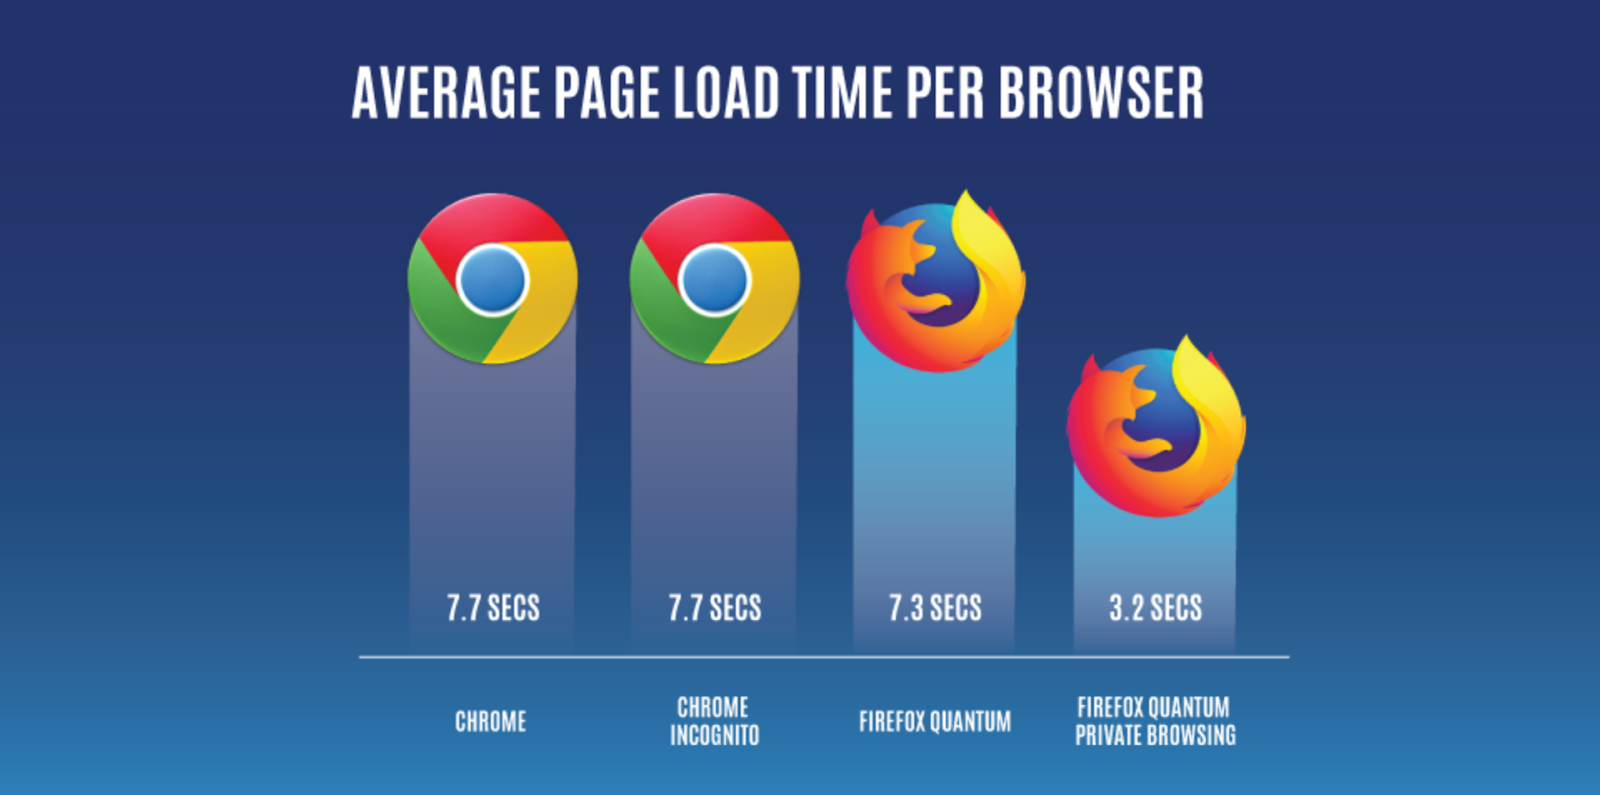 Is Firefox faster than Chrome?